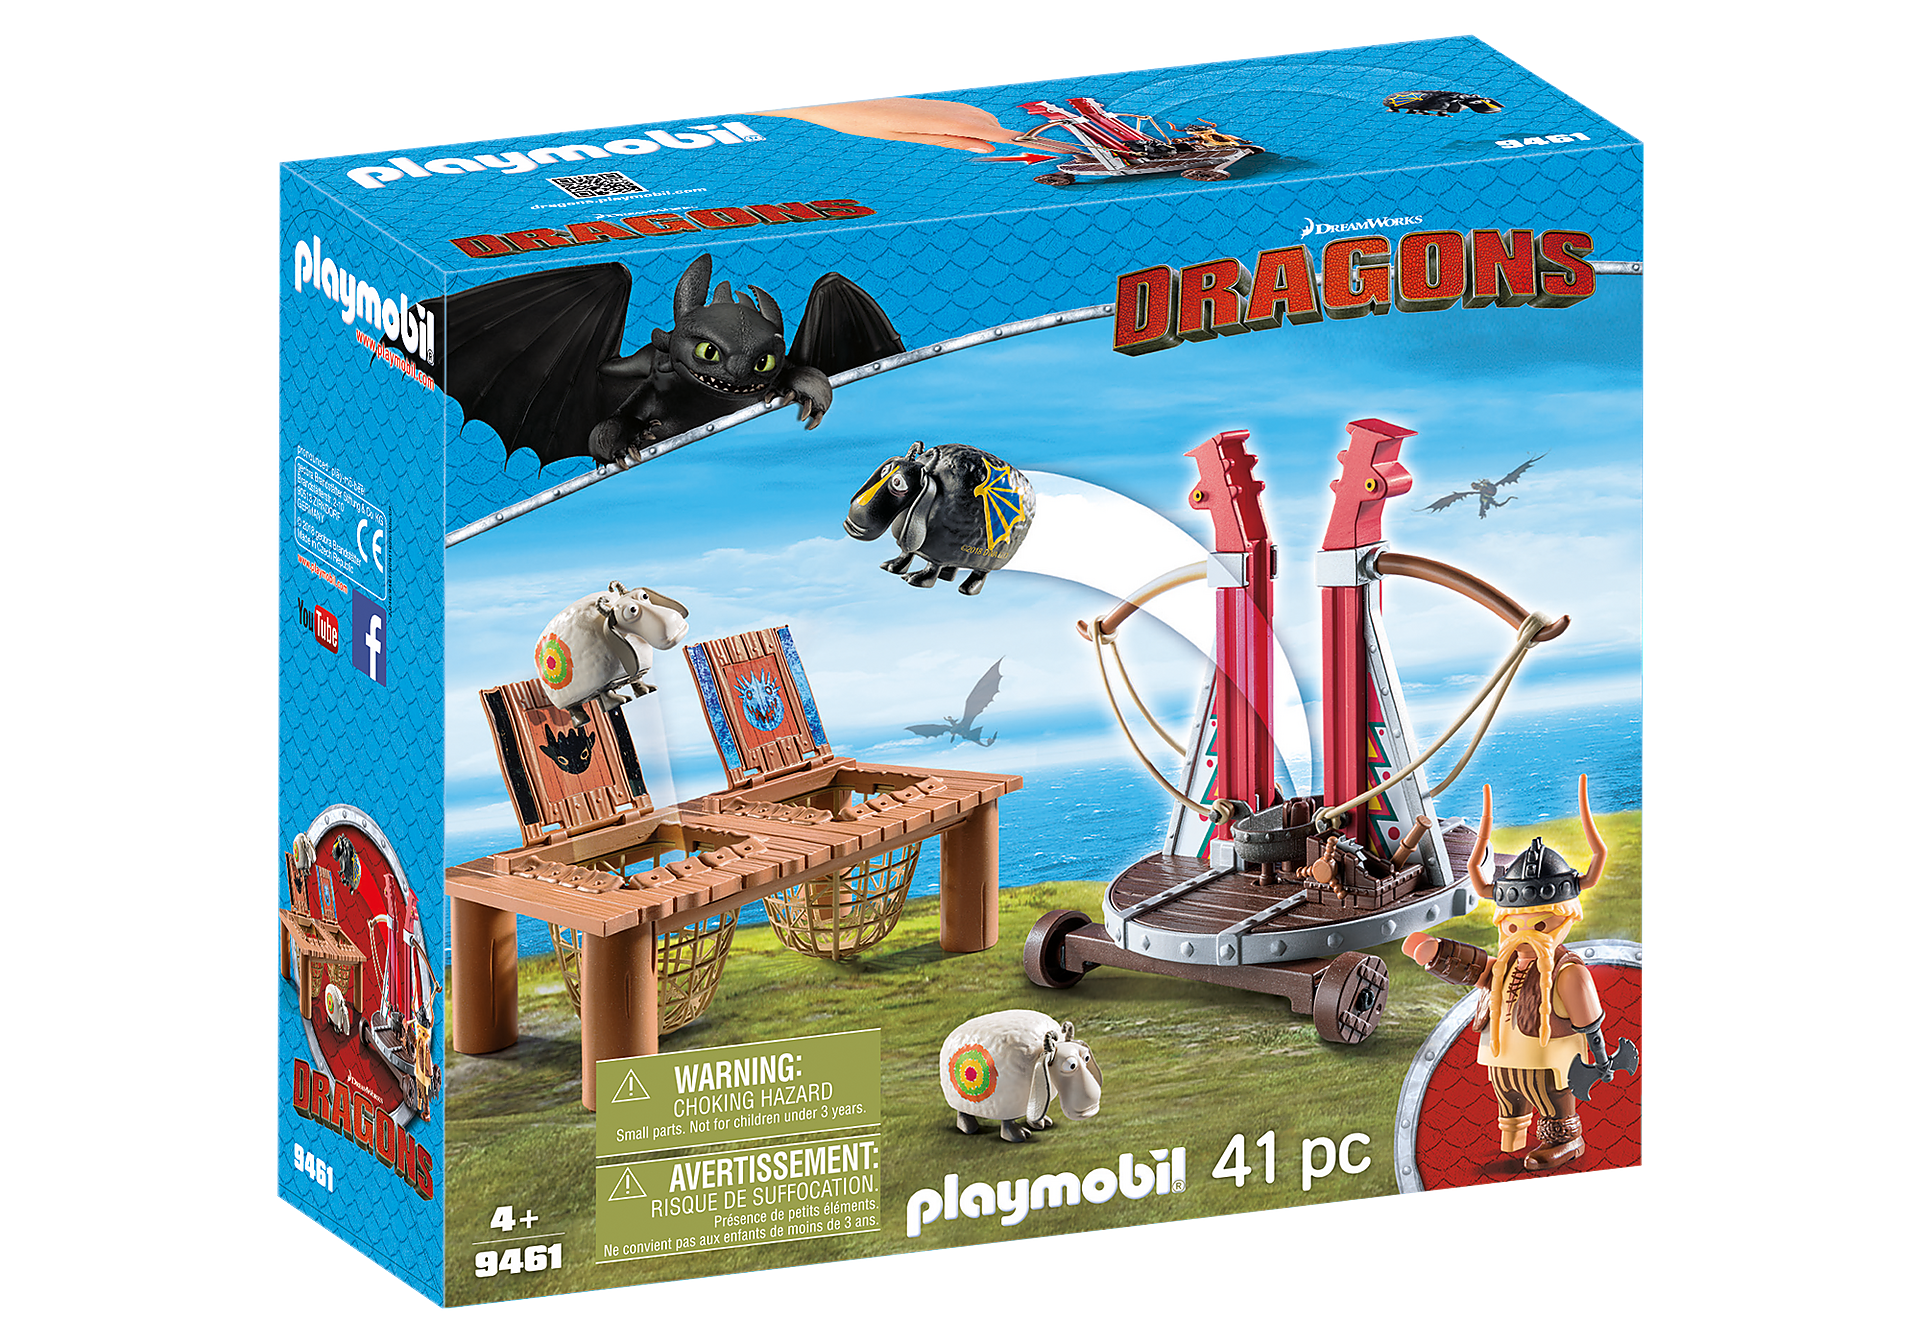 Playmobil - Icaris Quad with Phil - The Smiley Barn